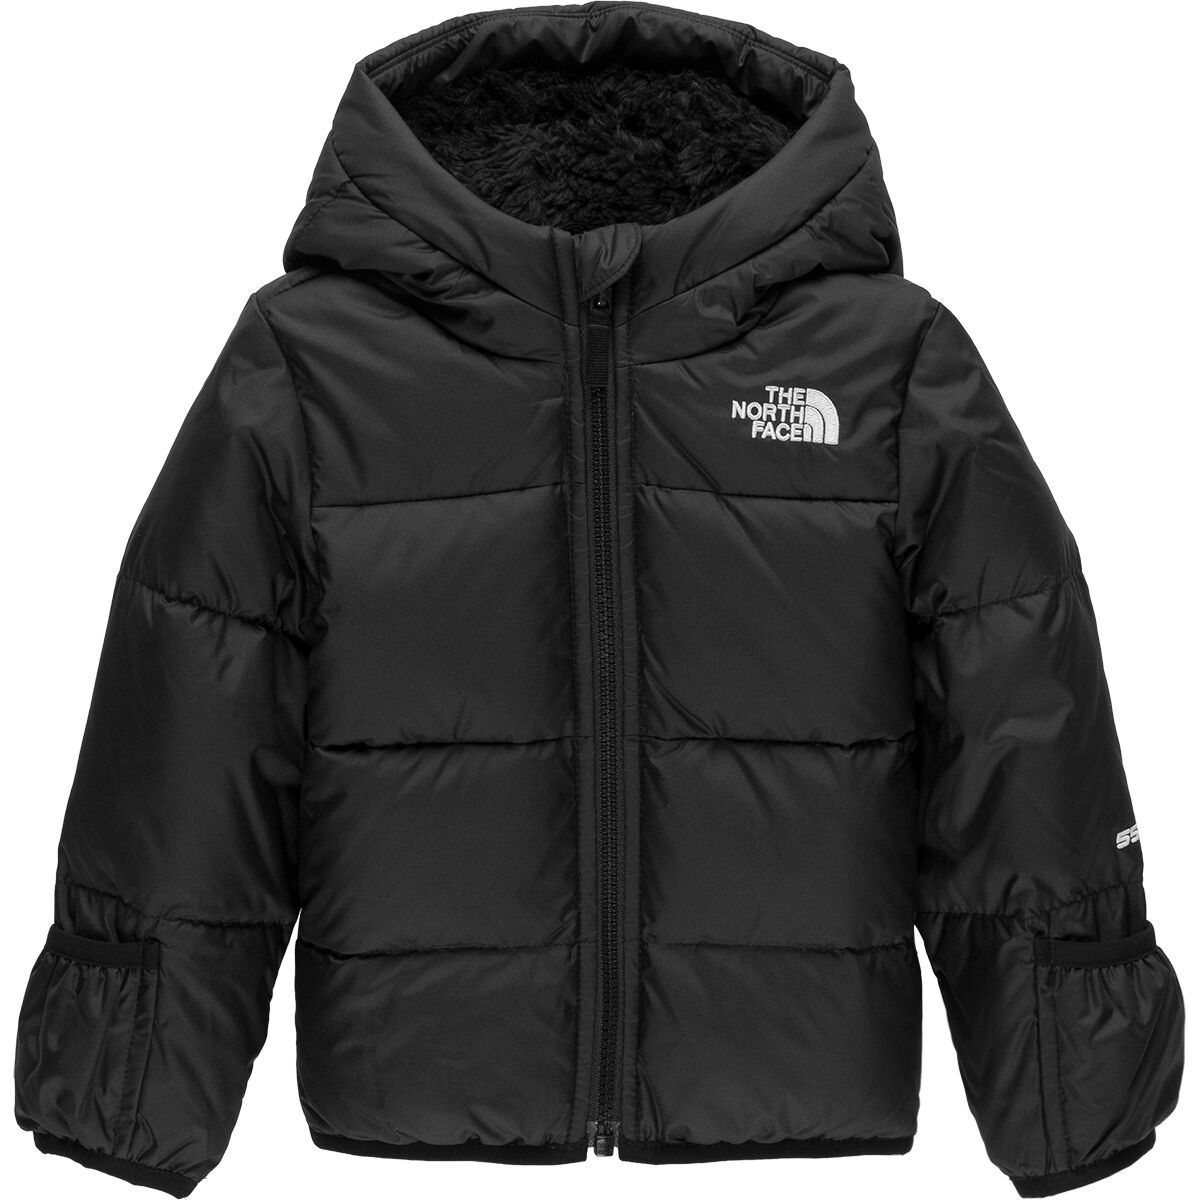 The North Face Moondoggy 2.0 Hooded Down Jacket - Infant Boys' - Kids